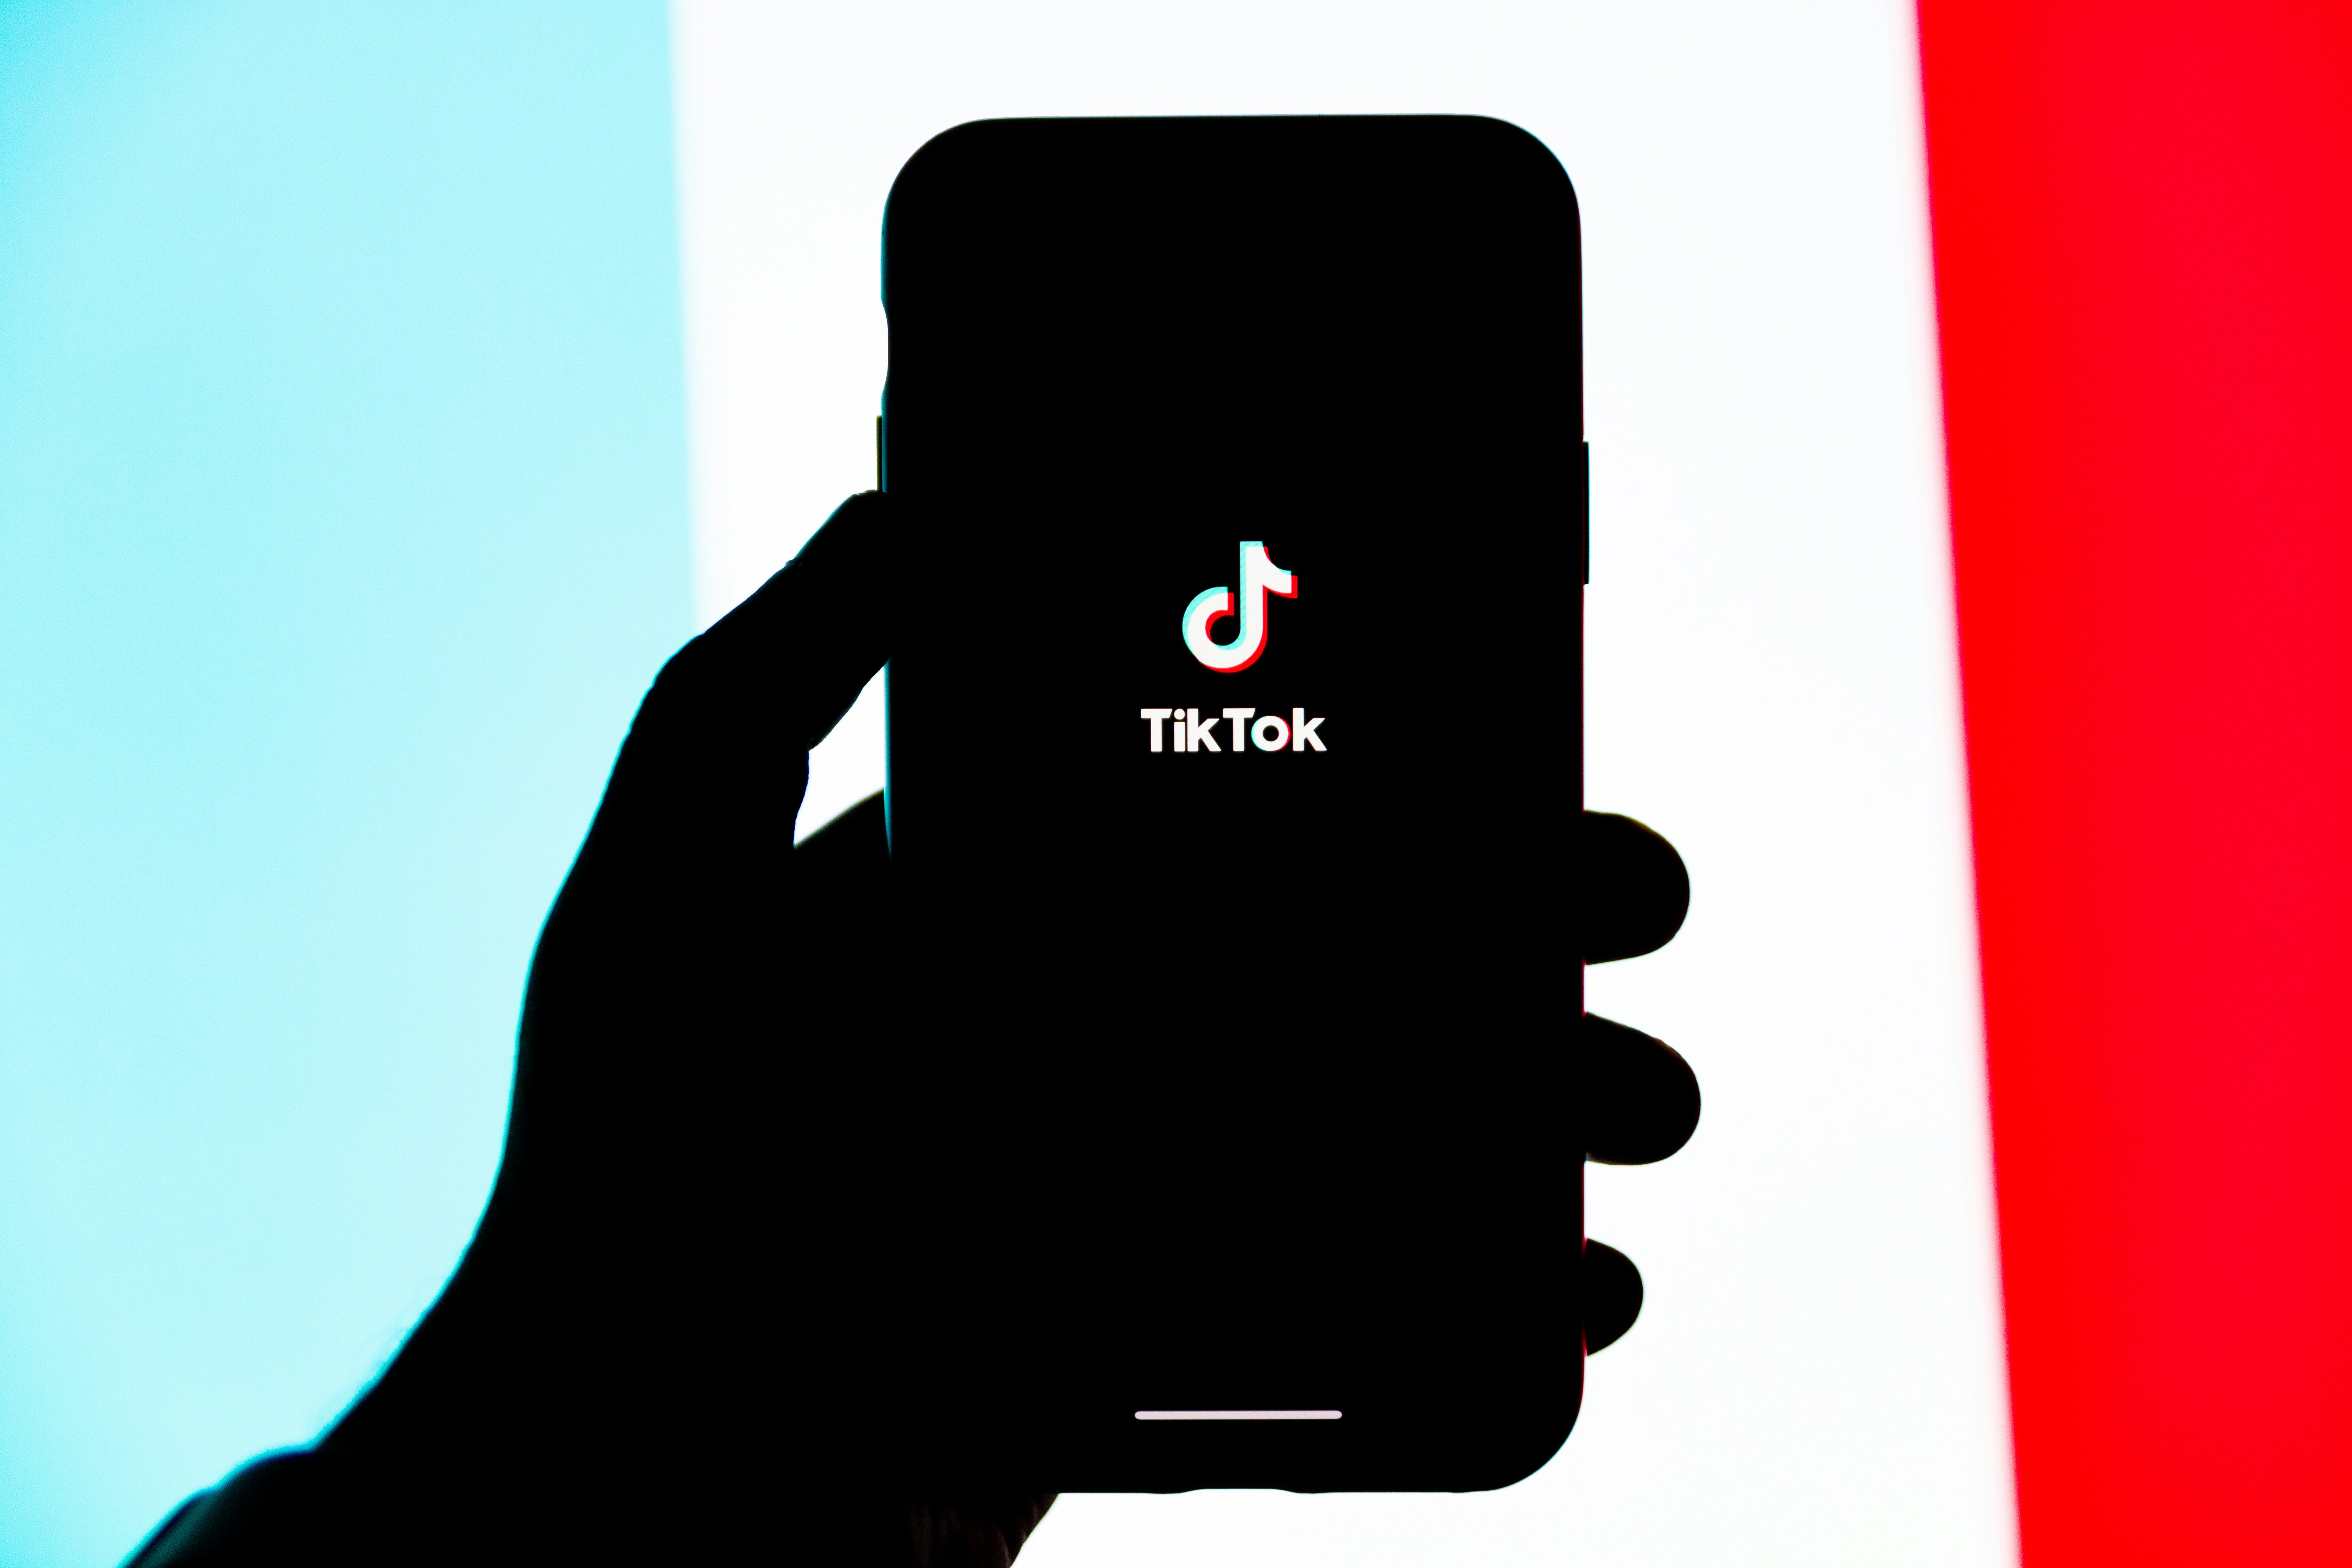 Universal Music has accused TikTok of pressuring and threatening to replace musicians with artificial intelligence